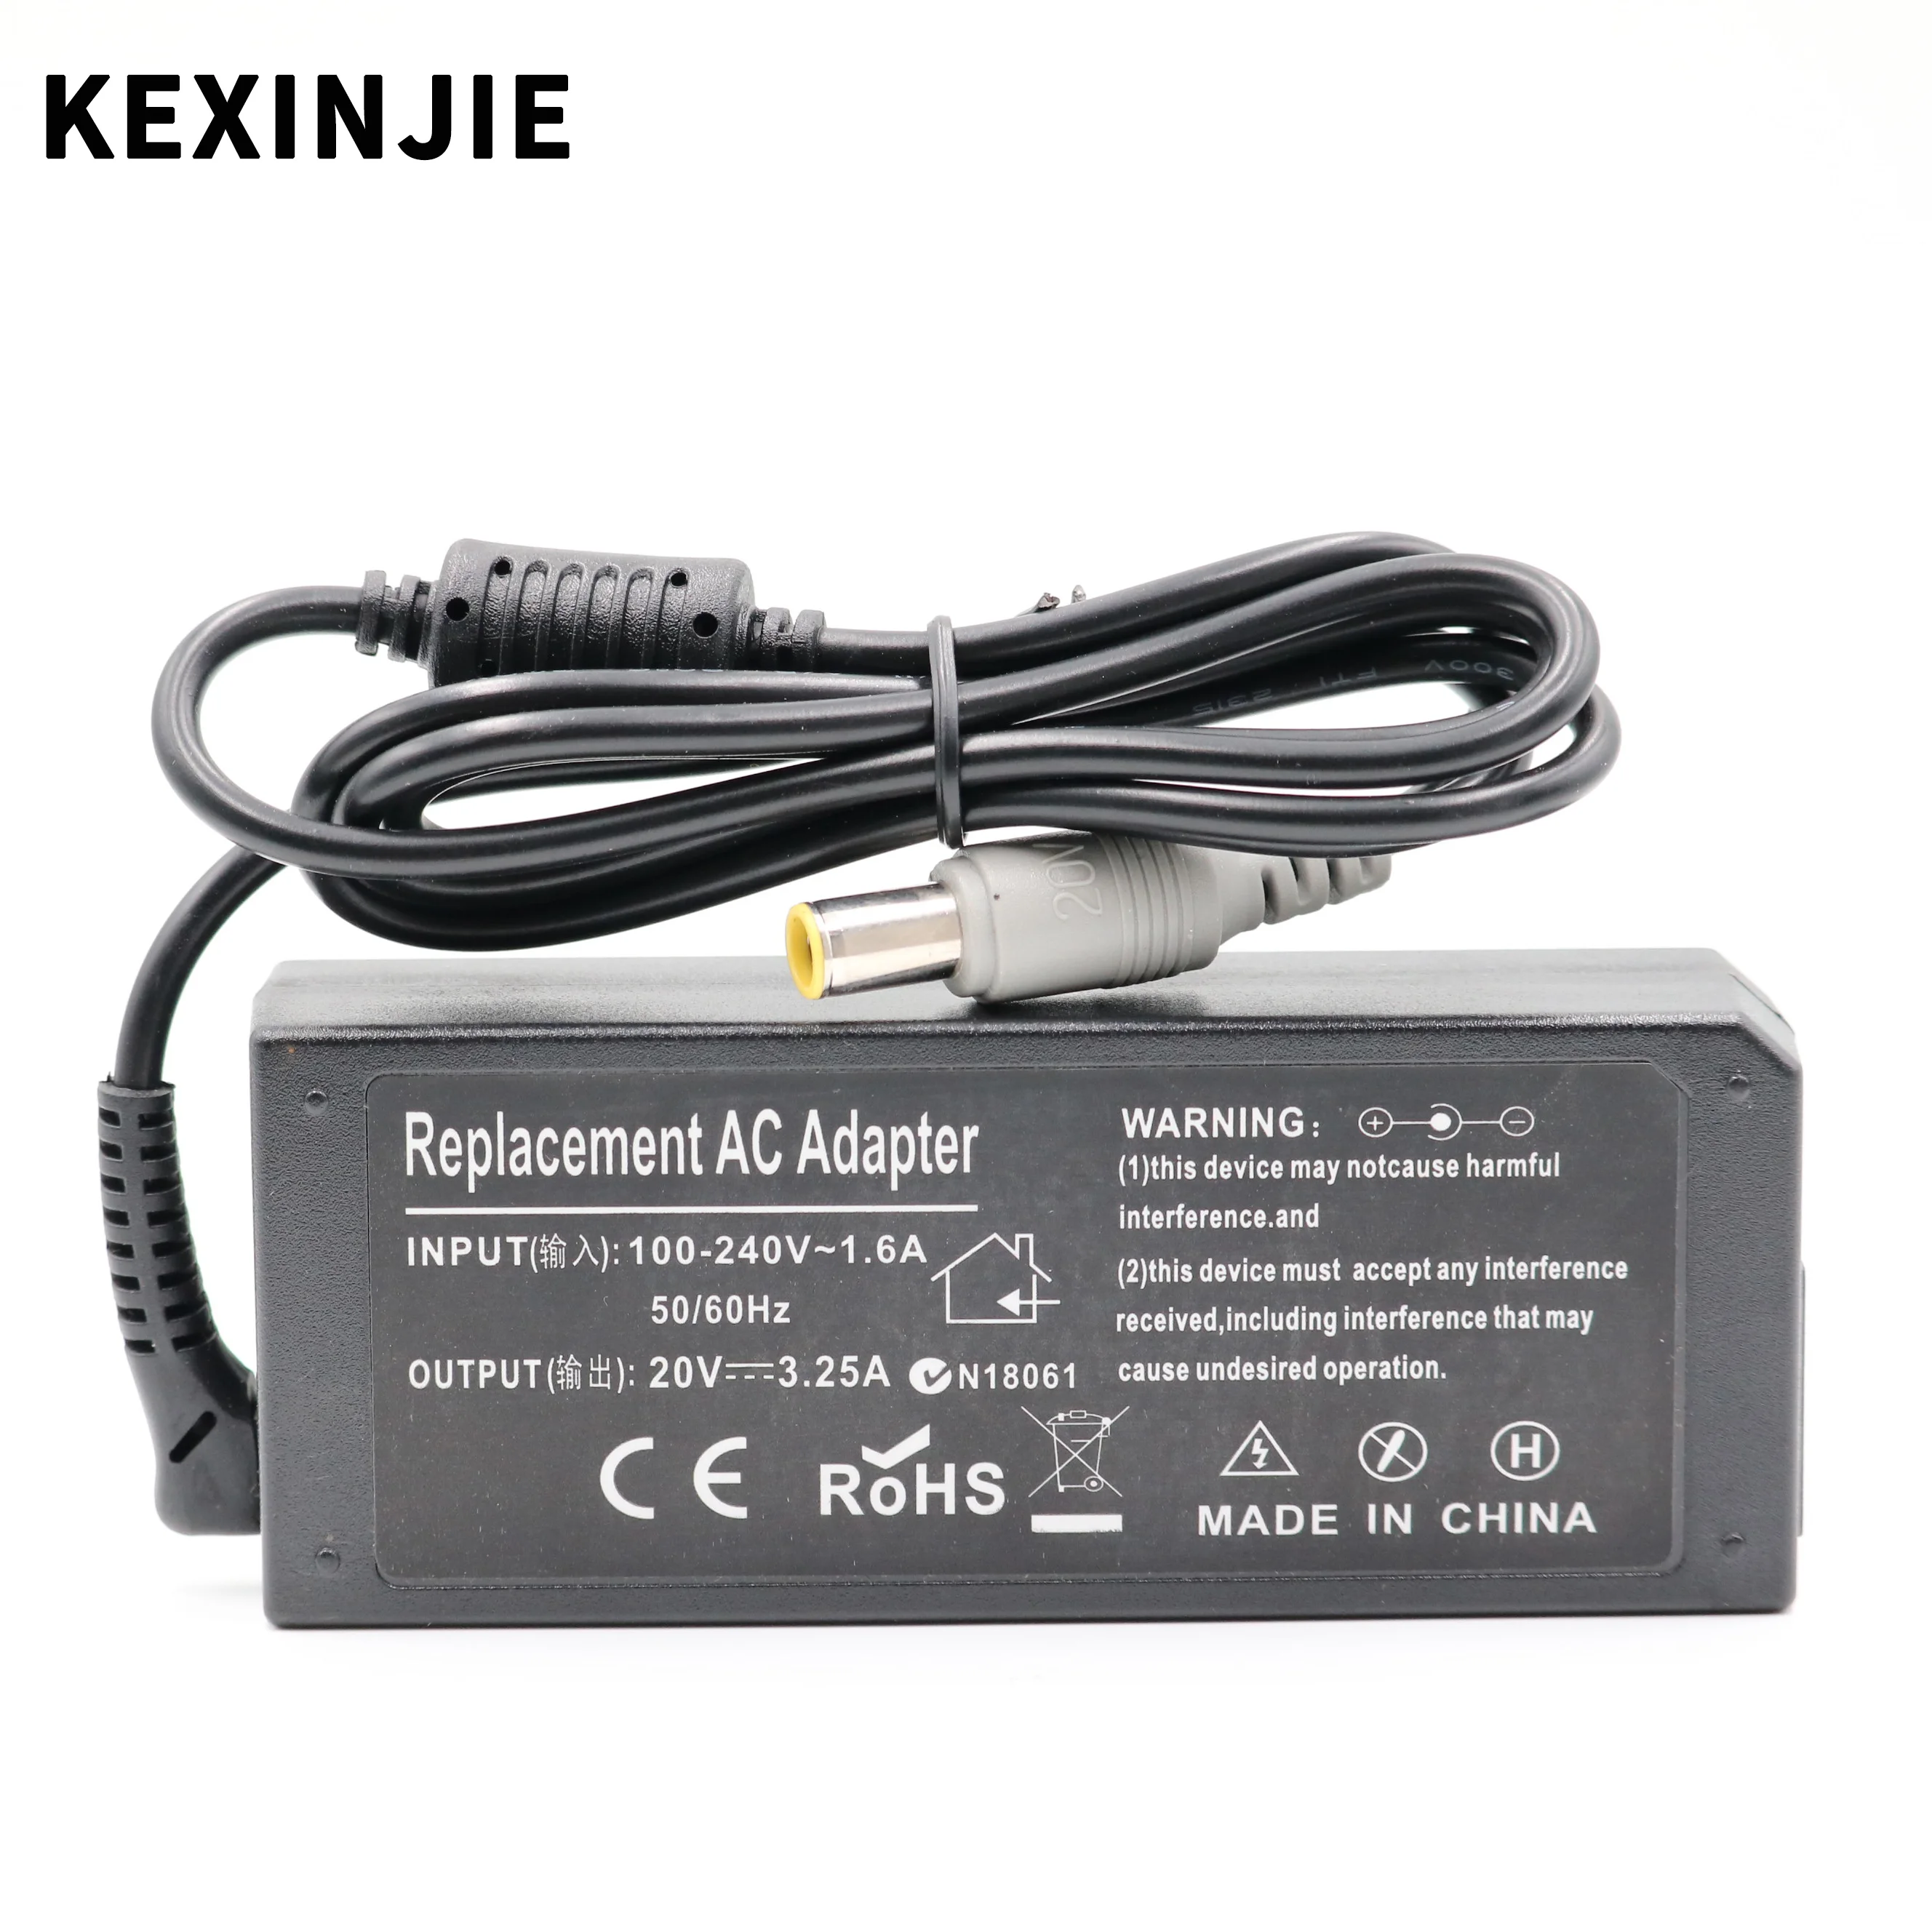 

65W 20V 3.25A Power AC Adapter Supply Laptop charger for IBM Lenovo ThinkPad X200 X300 R400 R500 T410 T410S T510 SL510 L410 L420